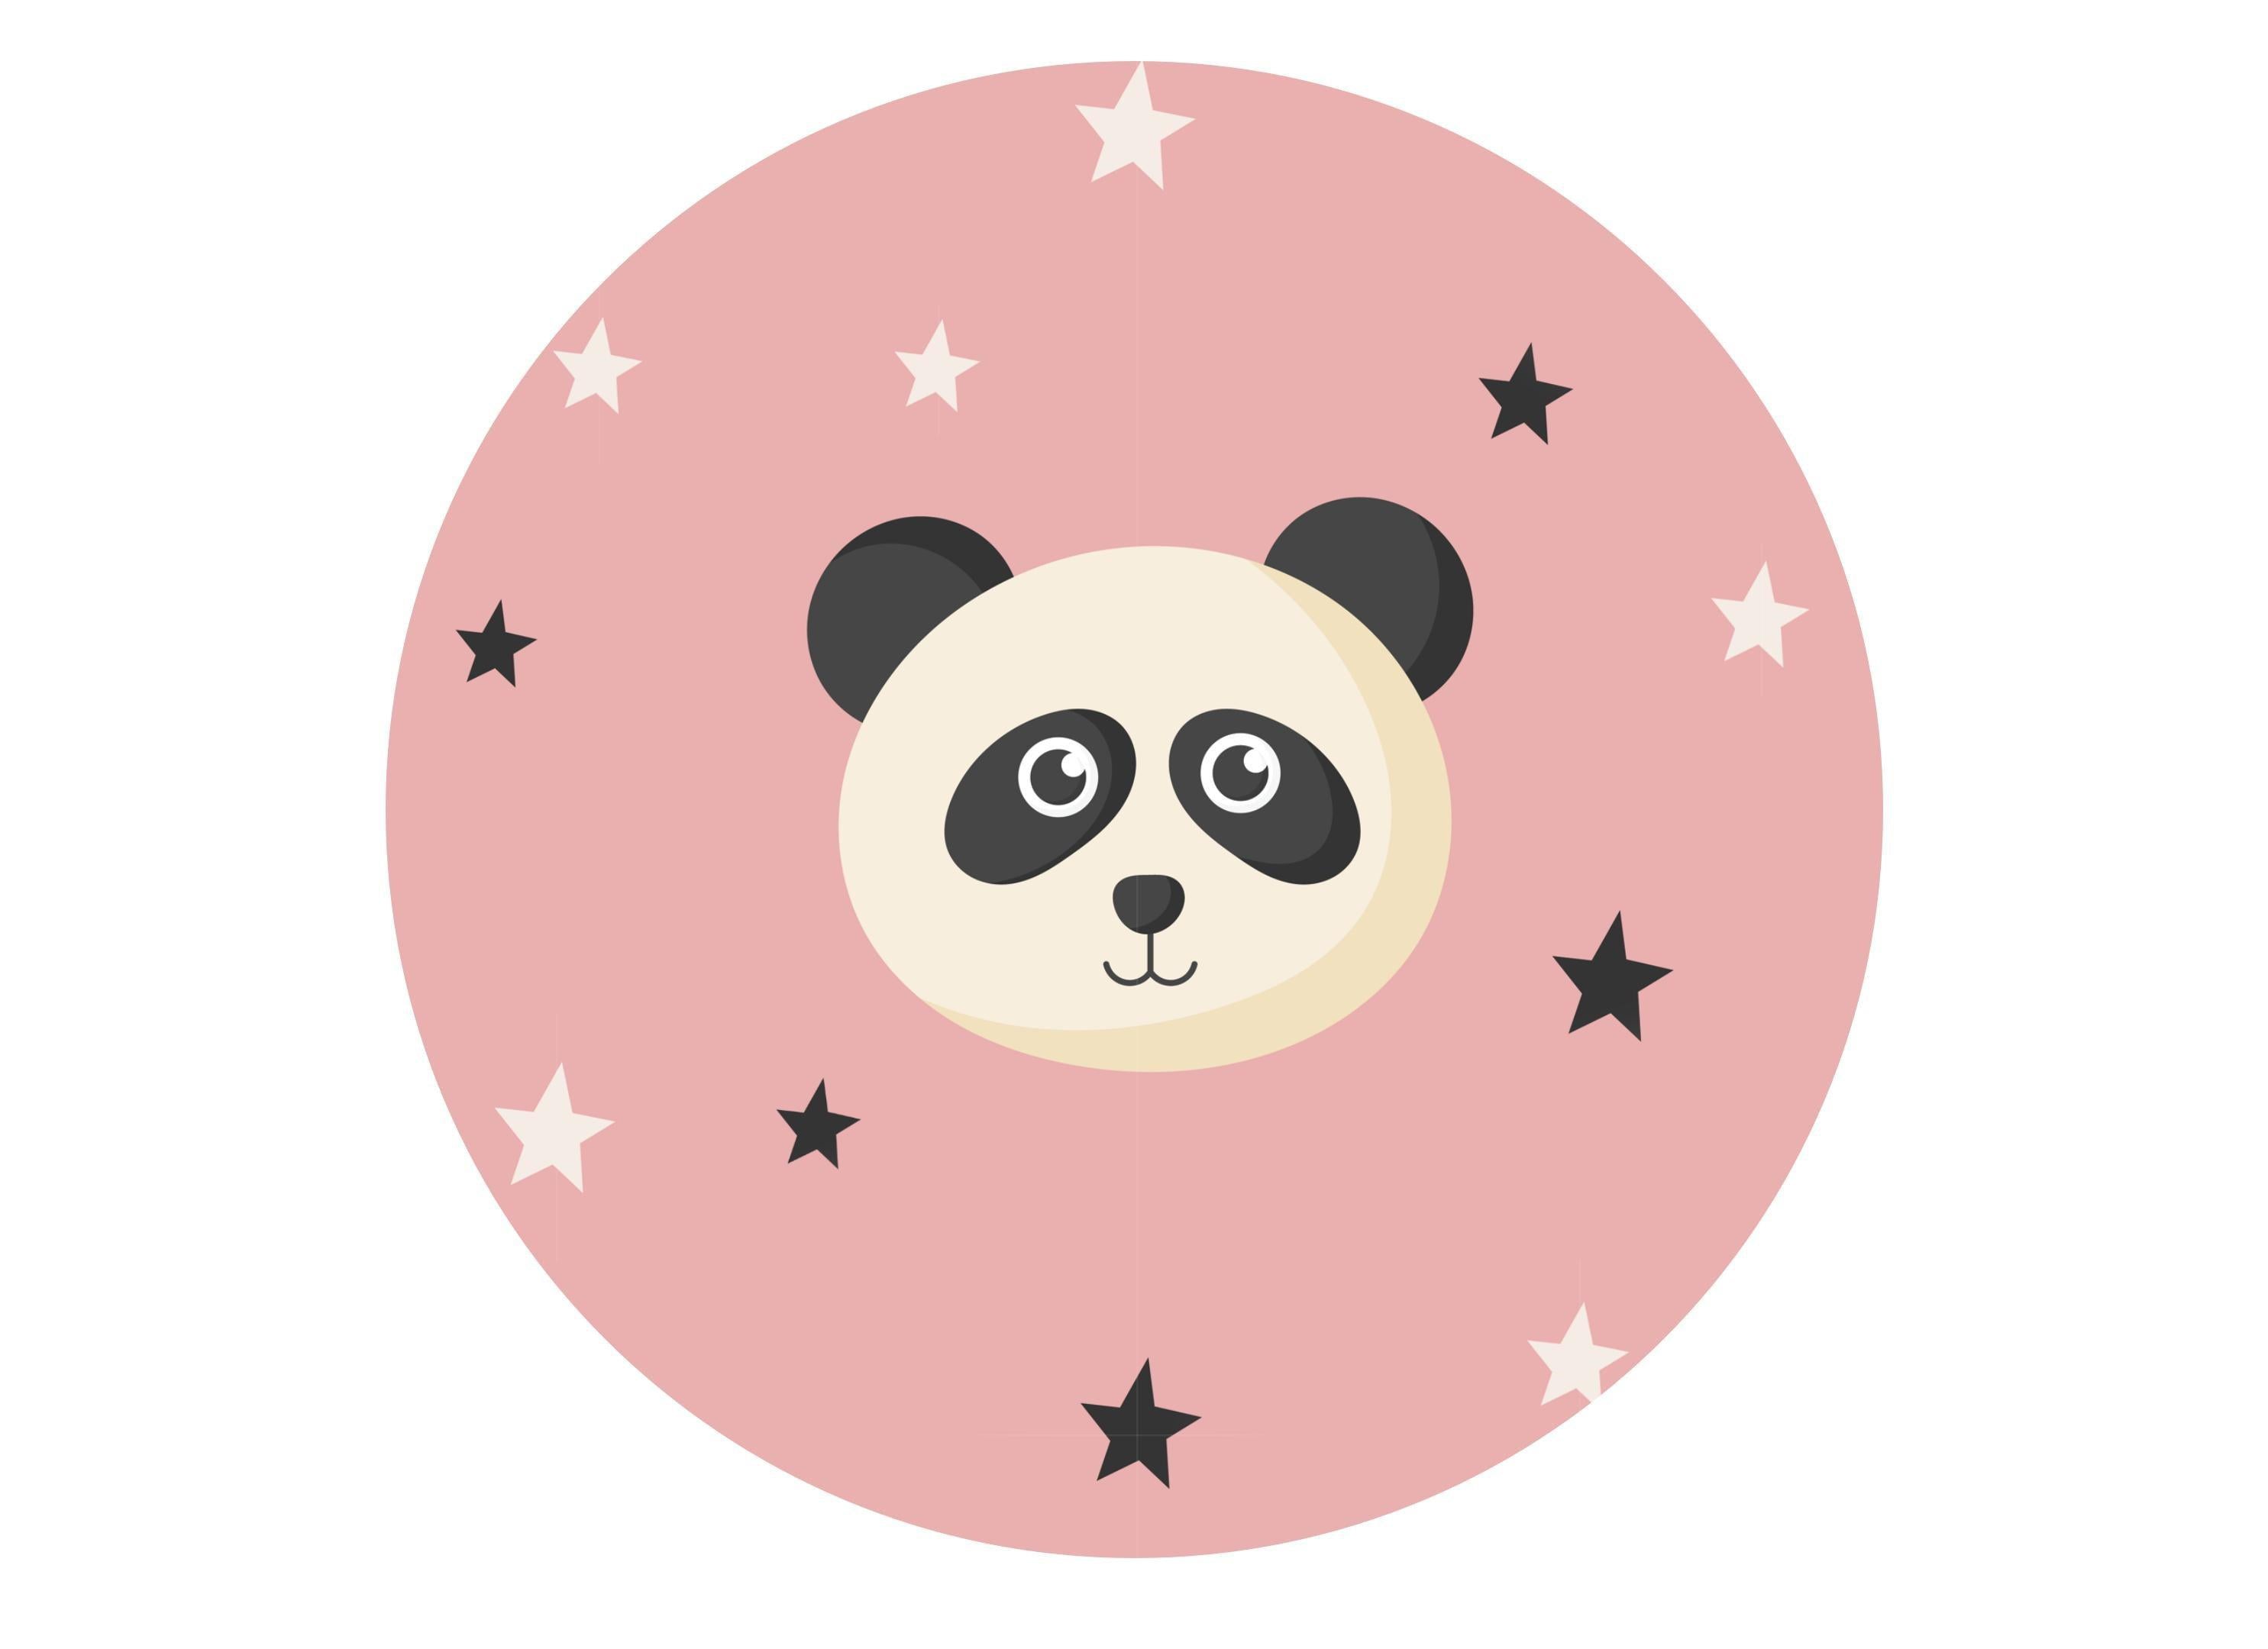 large round cake topper with a cute baby panda image